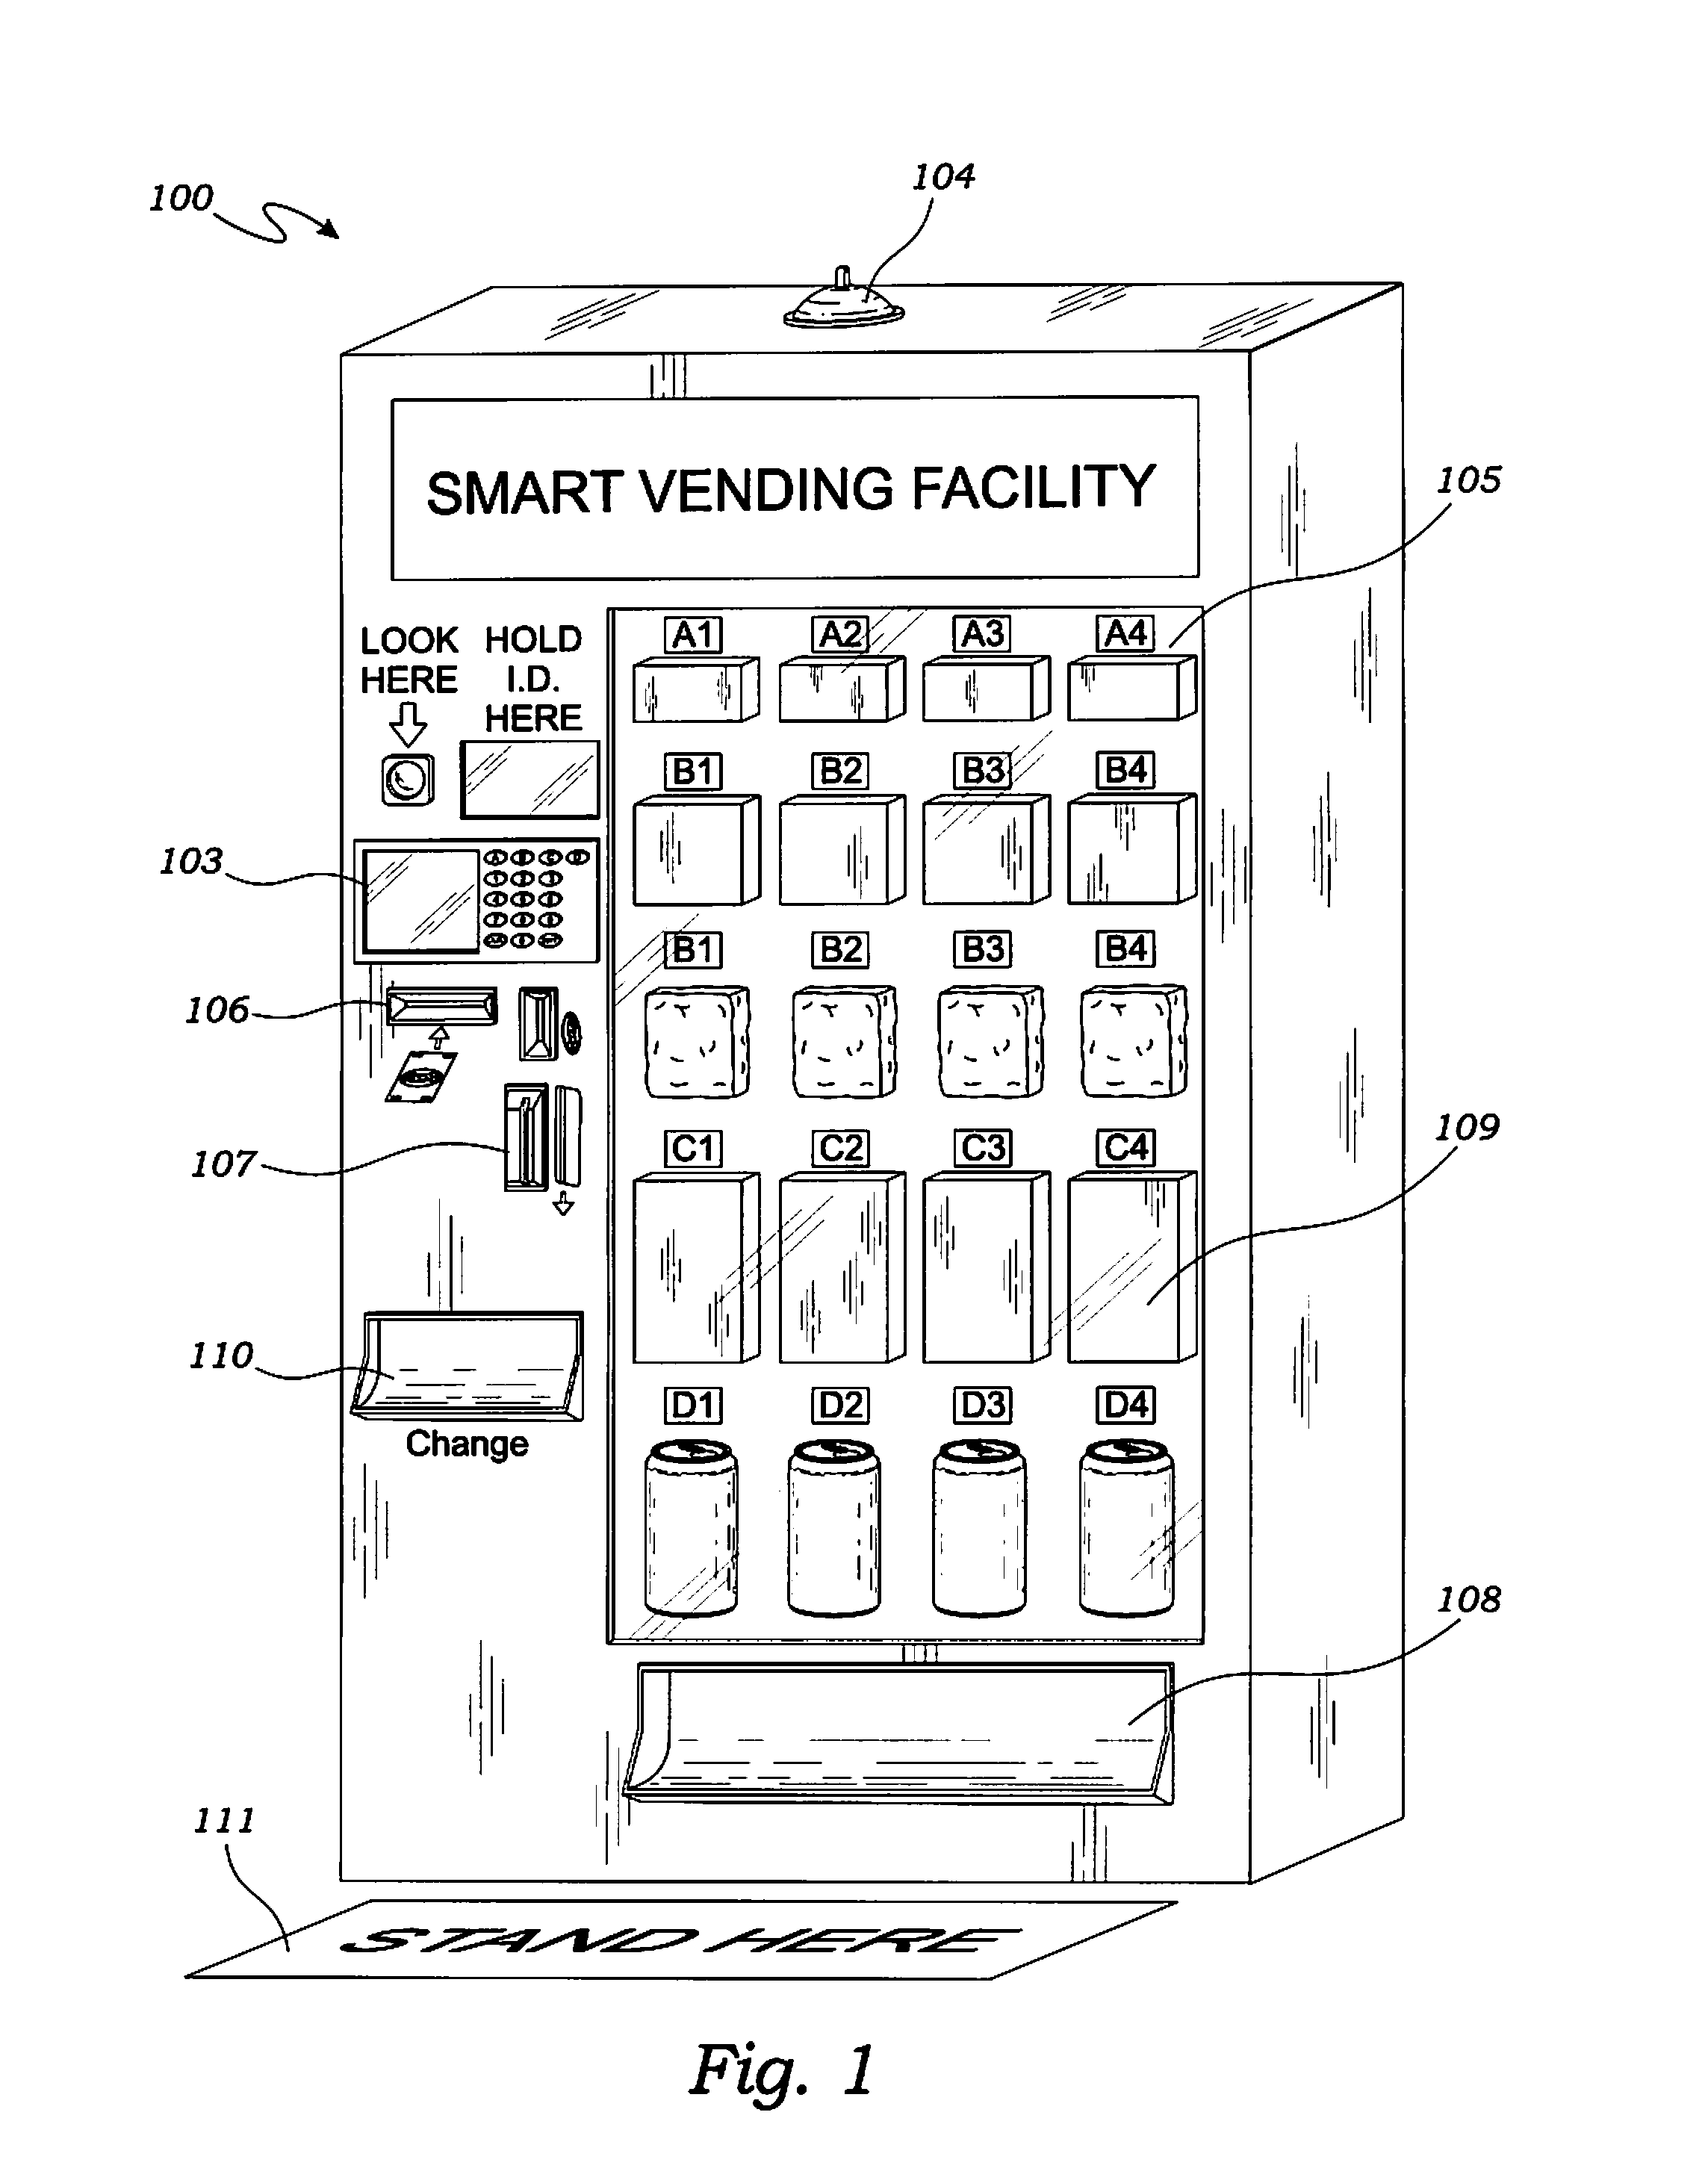 Smart vending apparatus with automated regulatory compliance verification and method of use